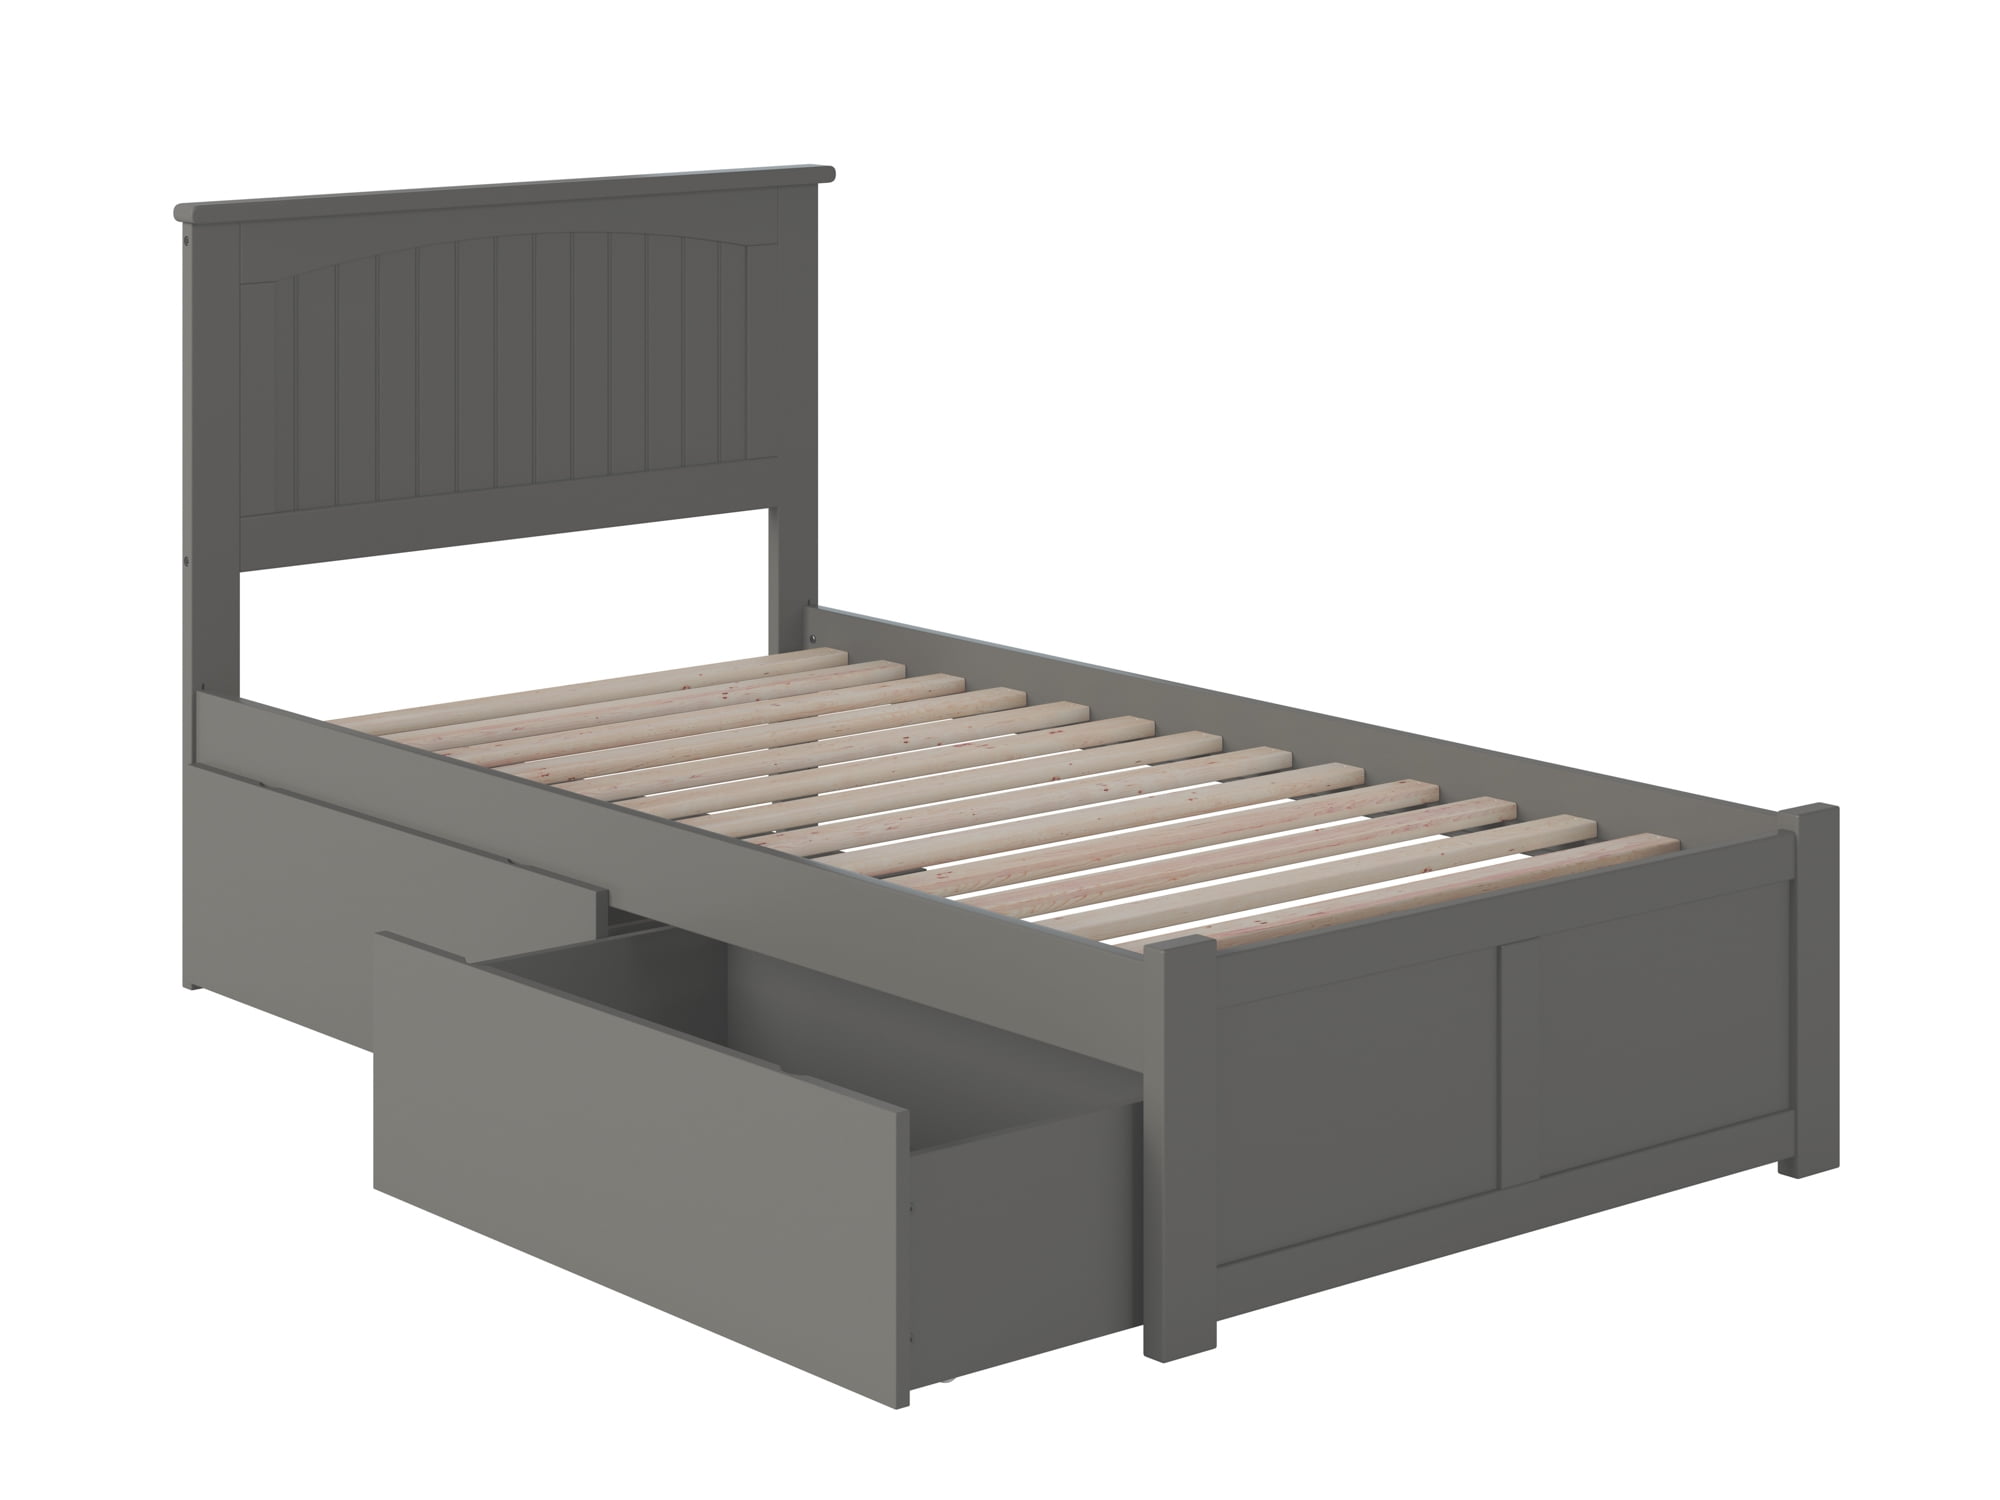 Ar8212119 Nantucket Twin Xl Platform Bed With Flat Panel Foot Board & 2 Urban Bed Drawers - Grey